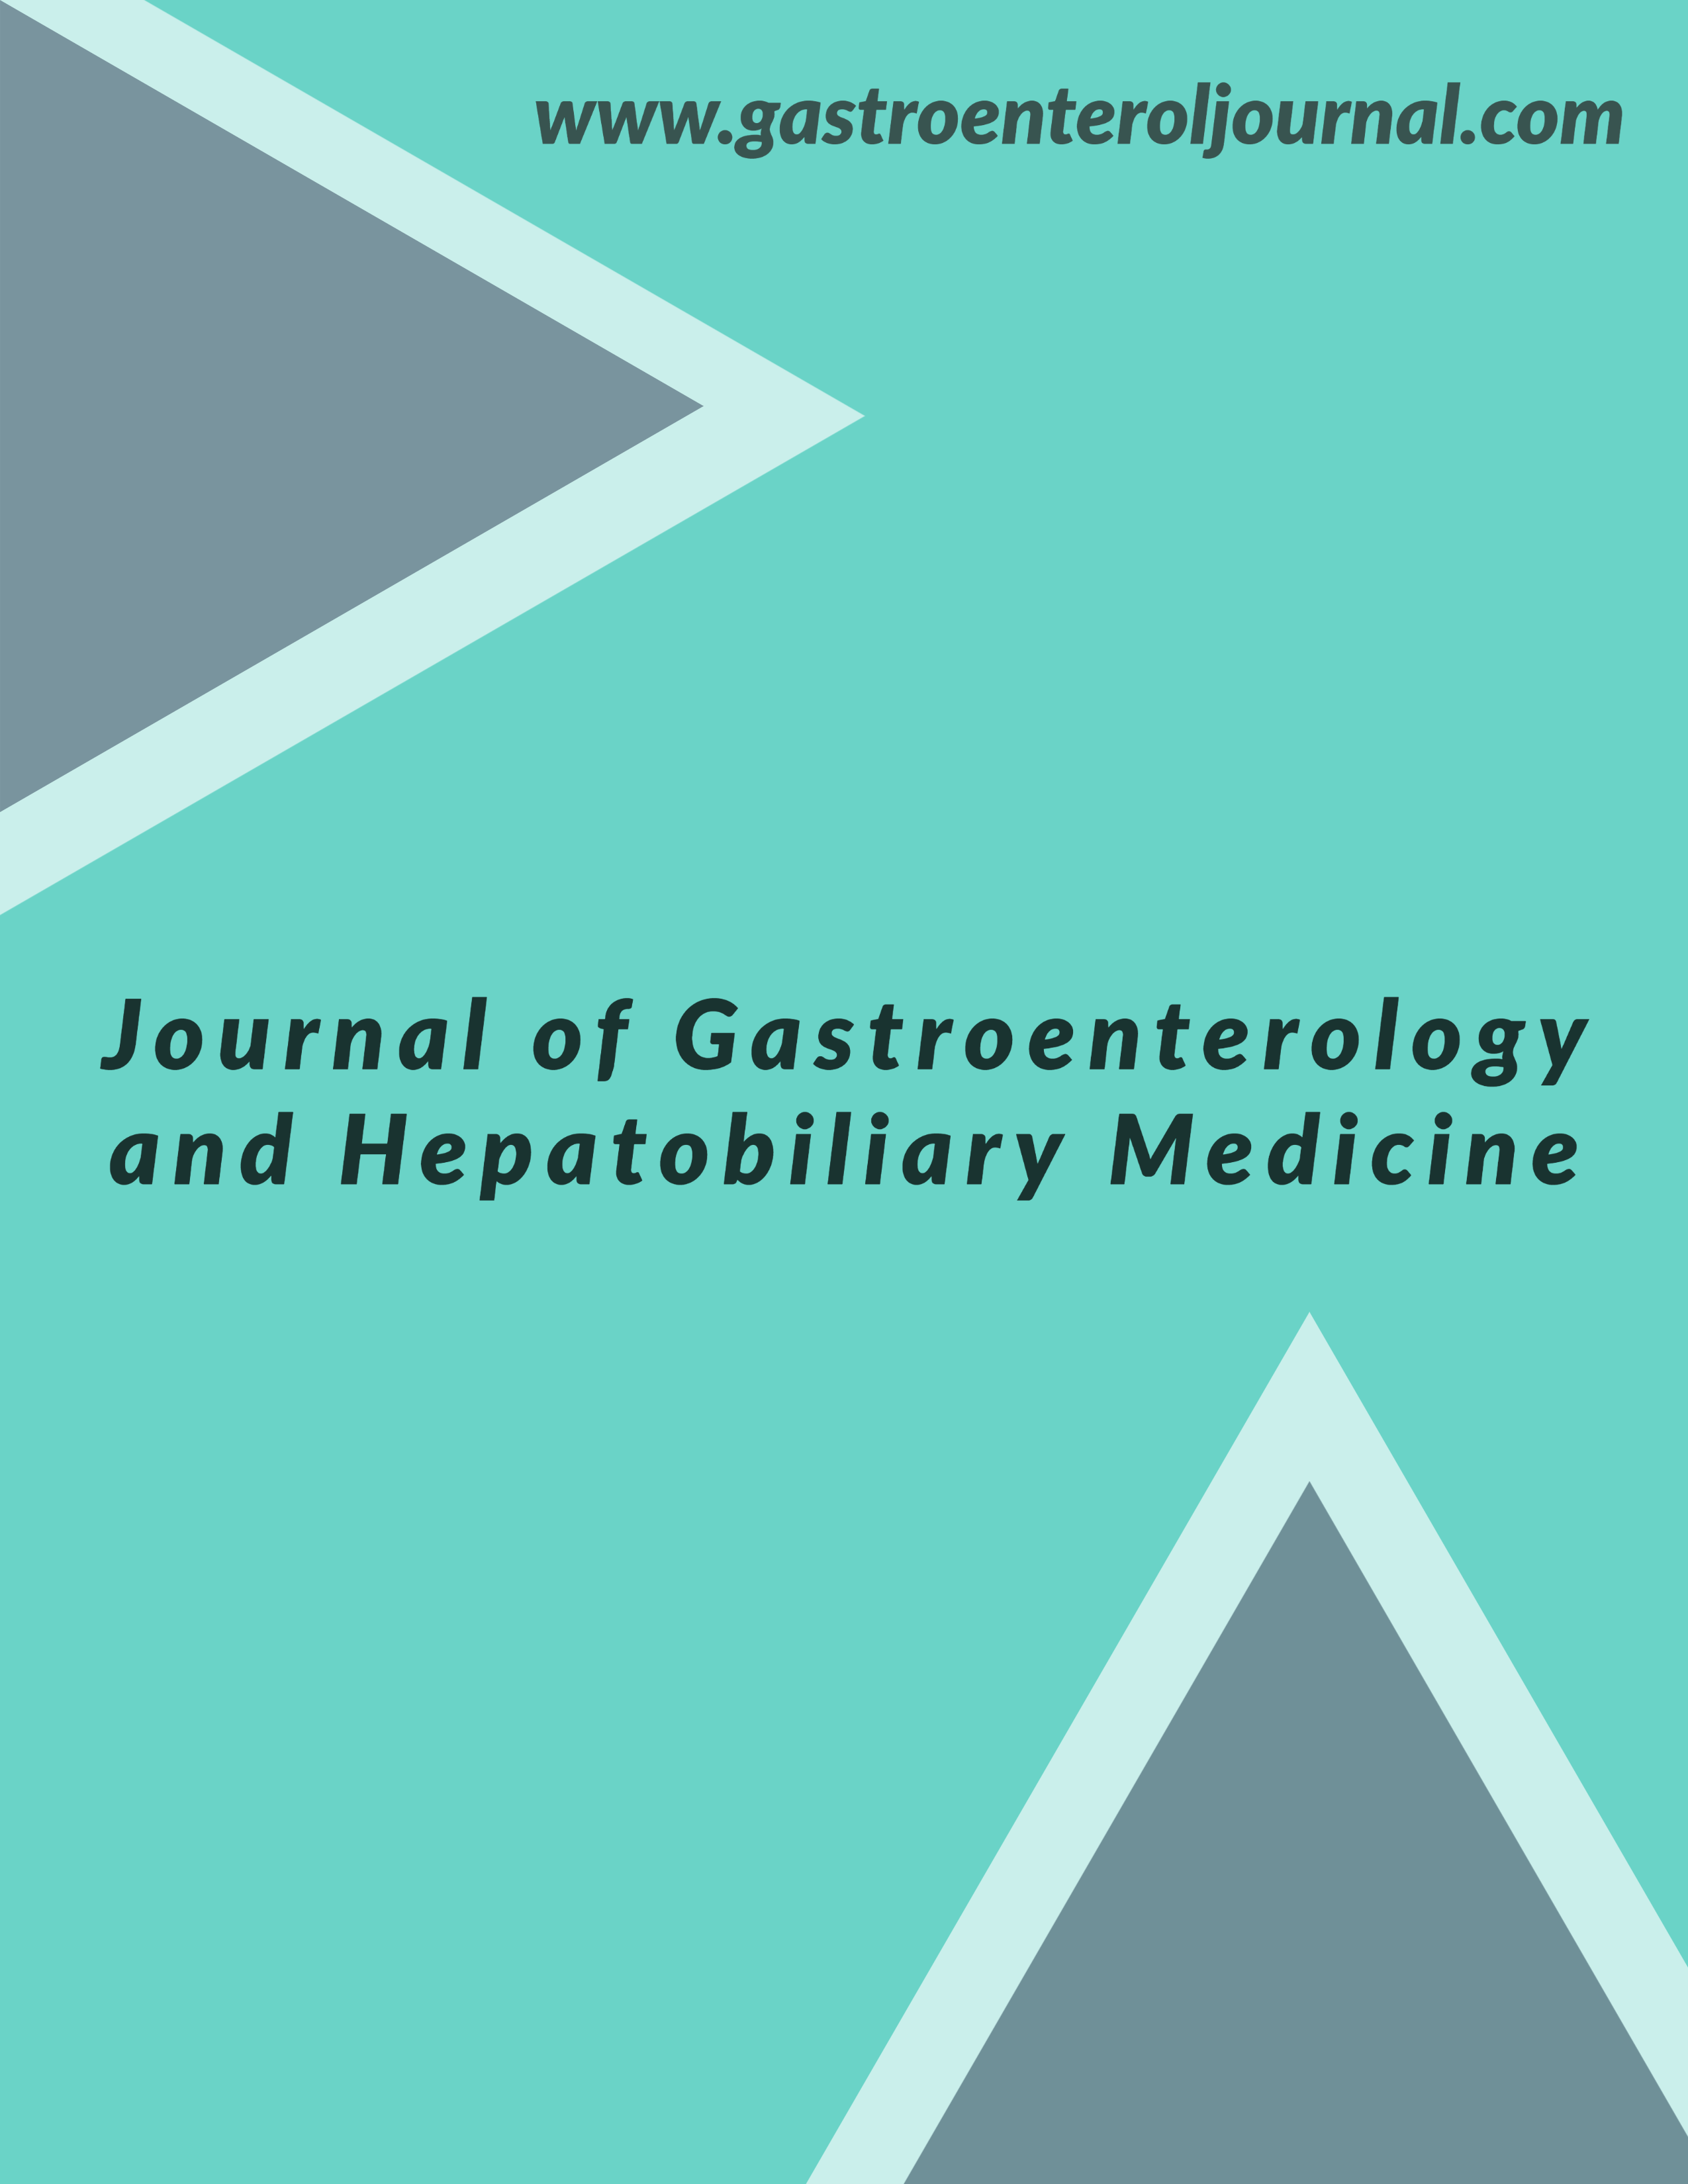 gastroenterology research and practice journal